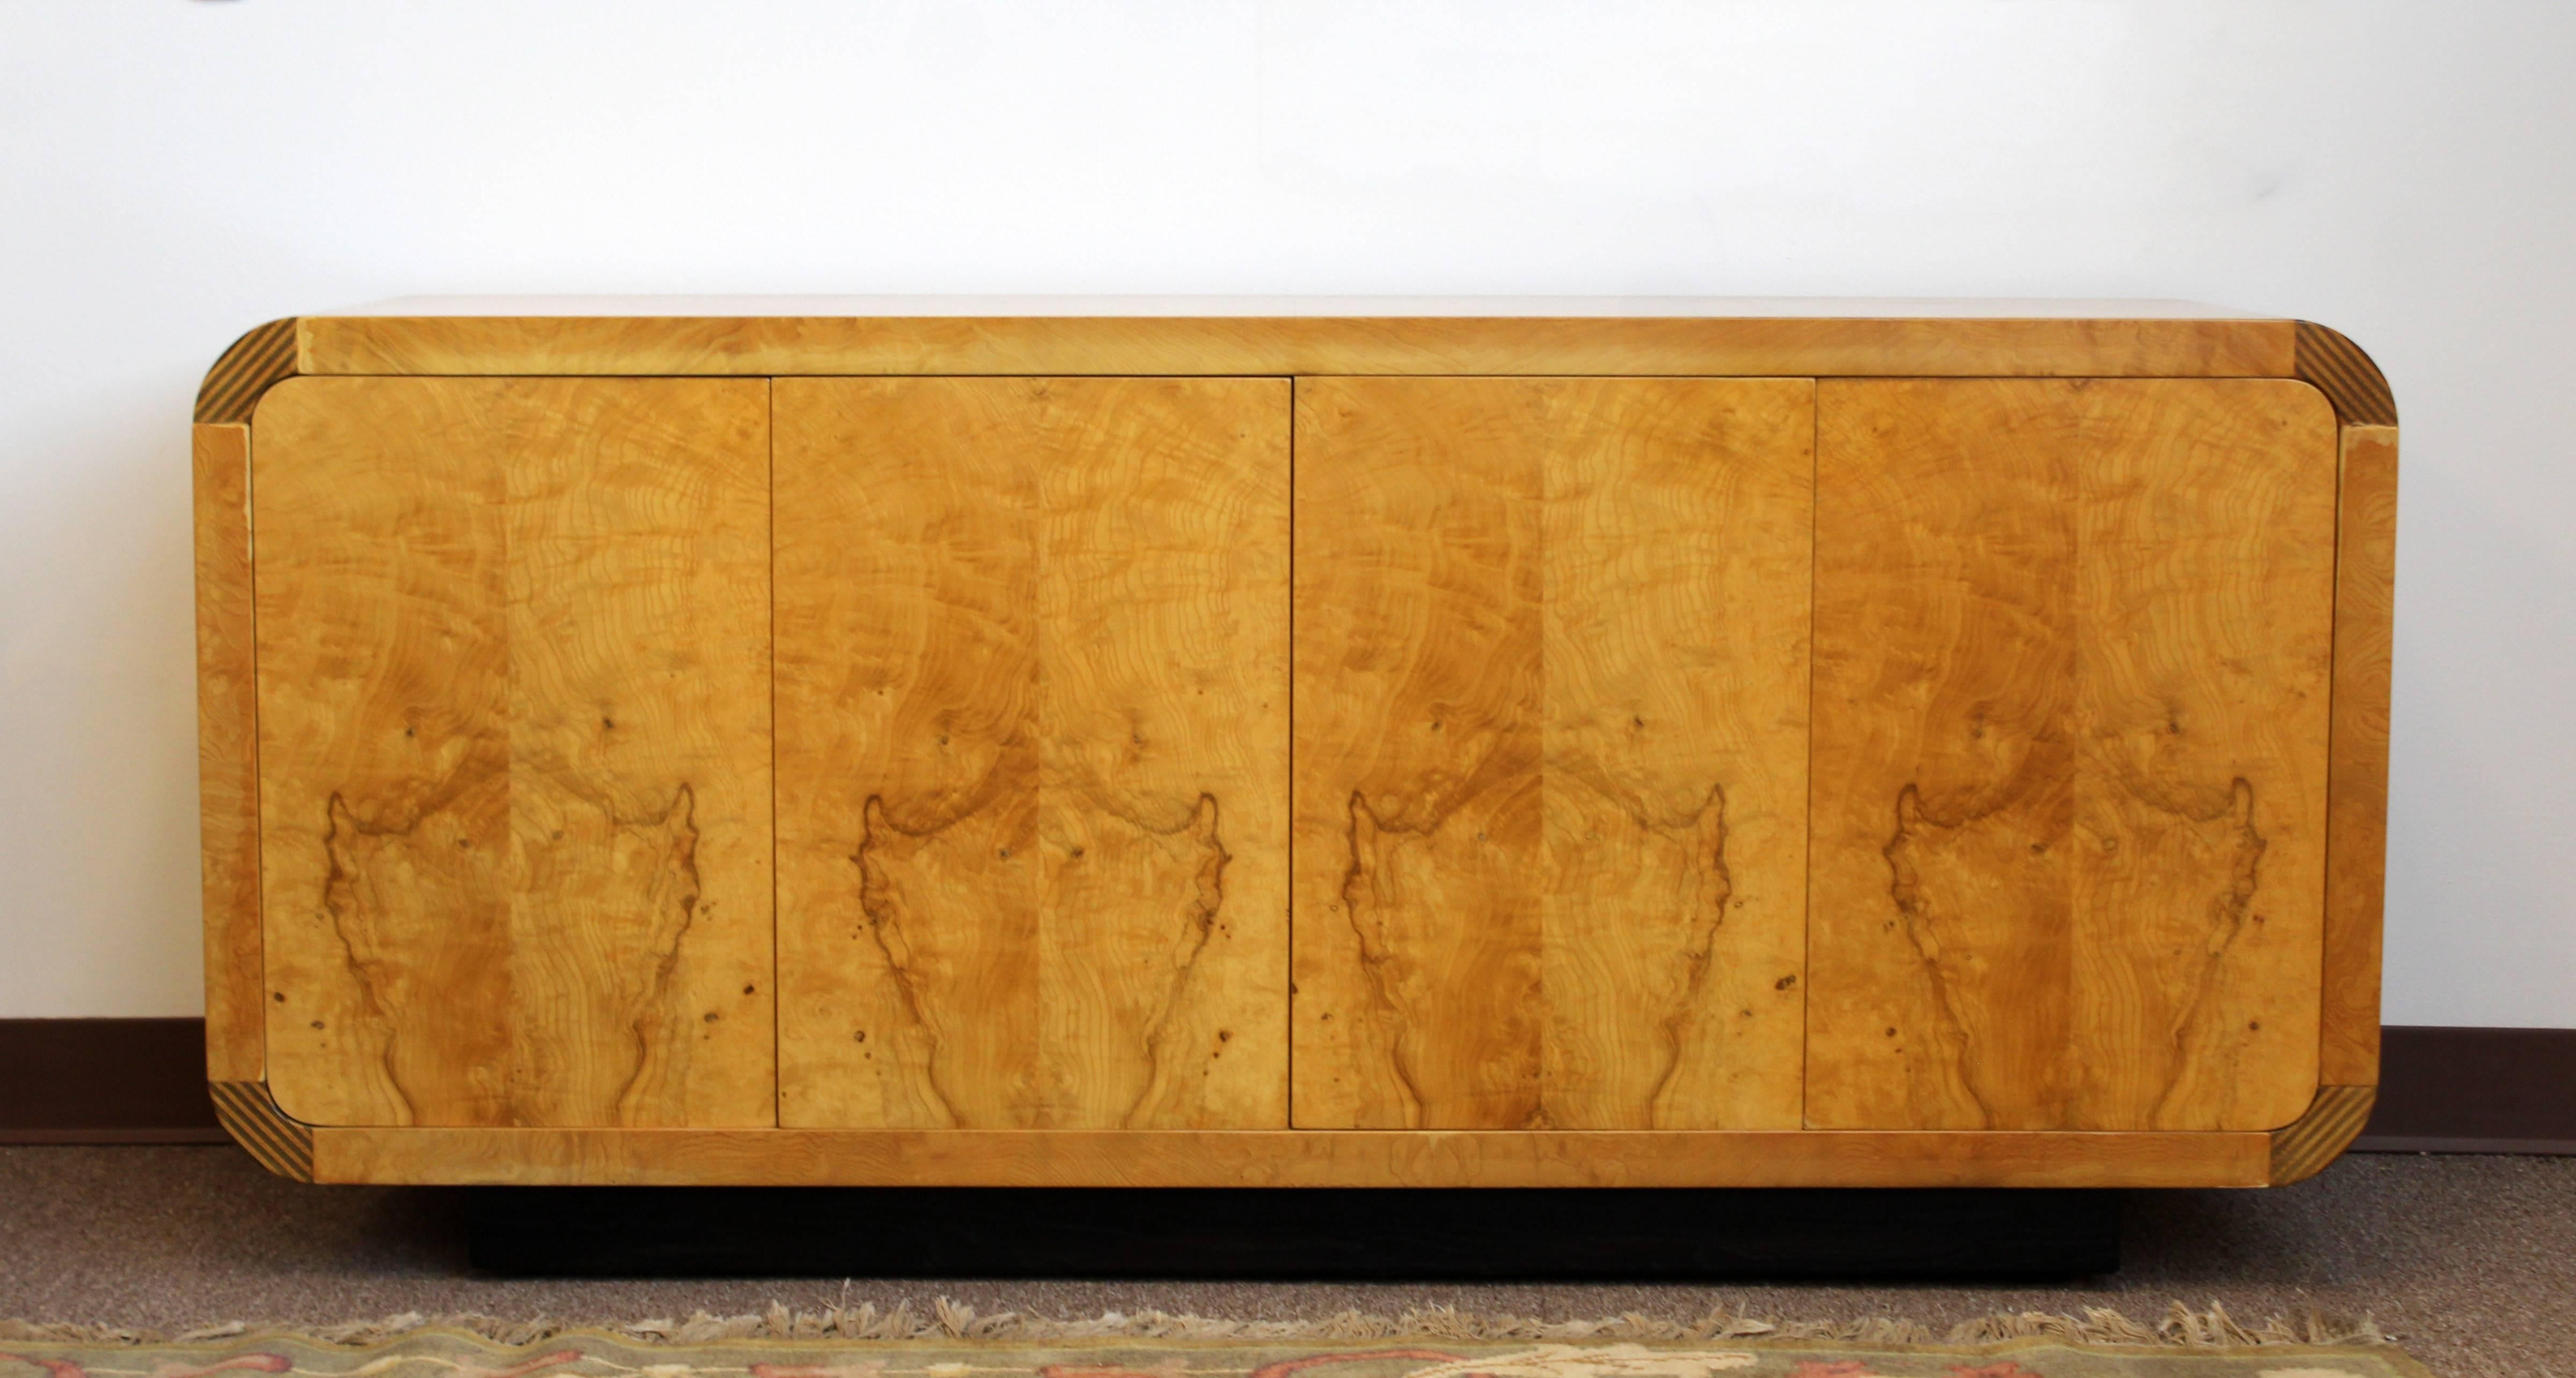 For your consideration is a magnificent credenza, made of burled wood and with ebony trim, with four doors and two shelves, from Henredon's Scene Two Collection, circa 1970s. In very good condition. The dimensions are 60